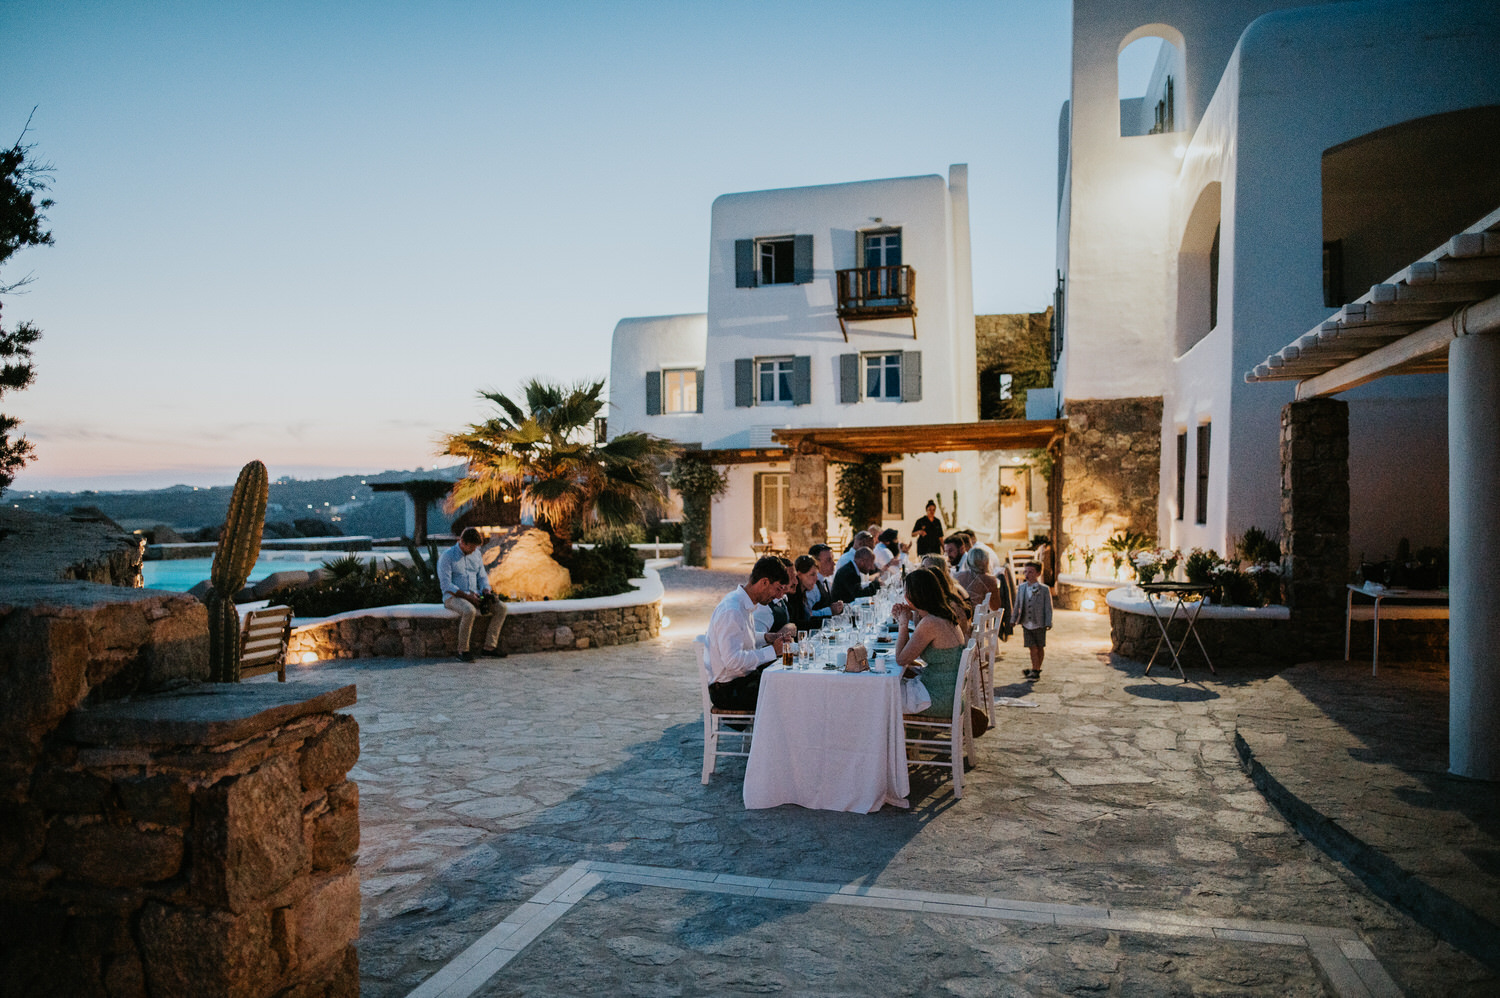 Mykonos wedding photographer: wedding party at the table with the villa, palm tree and the turquoise swimming pool at dusk on Mykonos wedding.